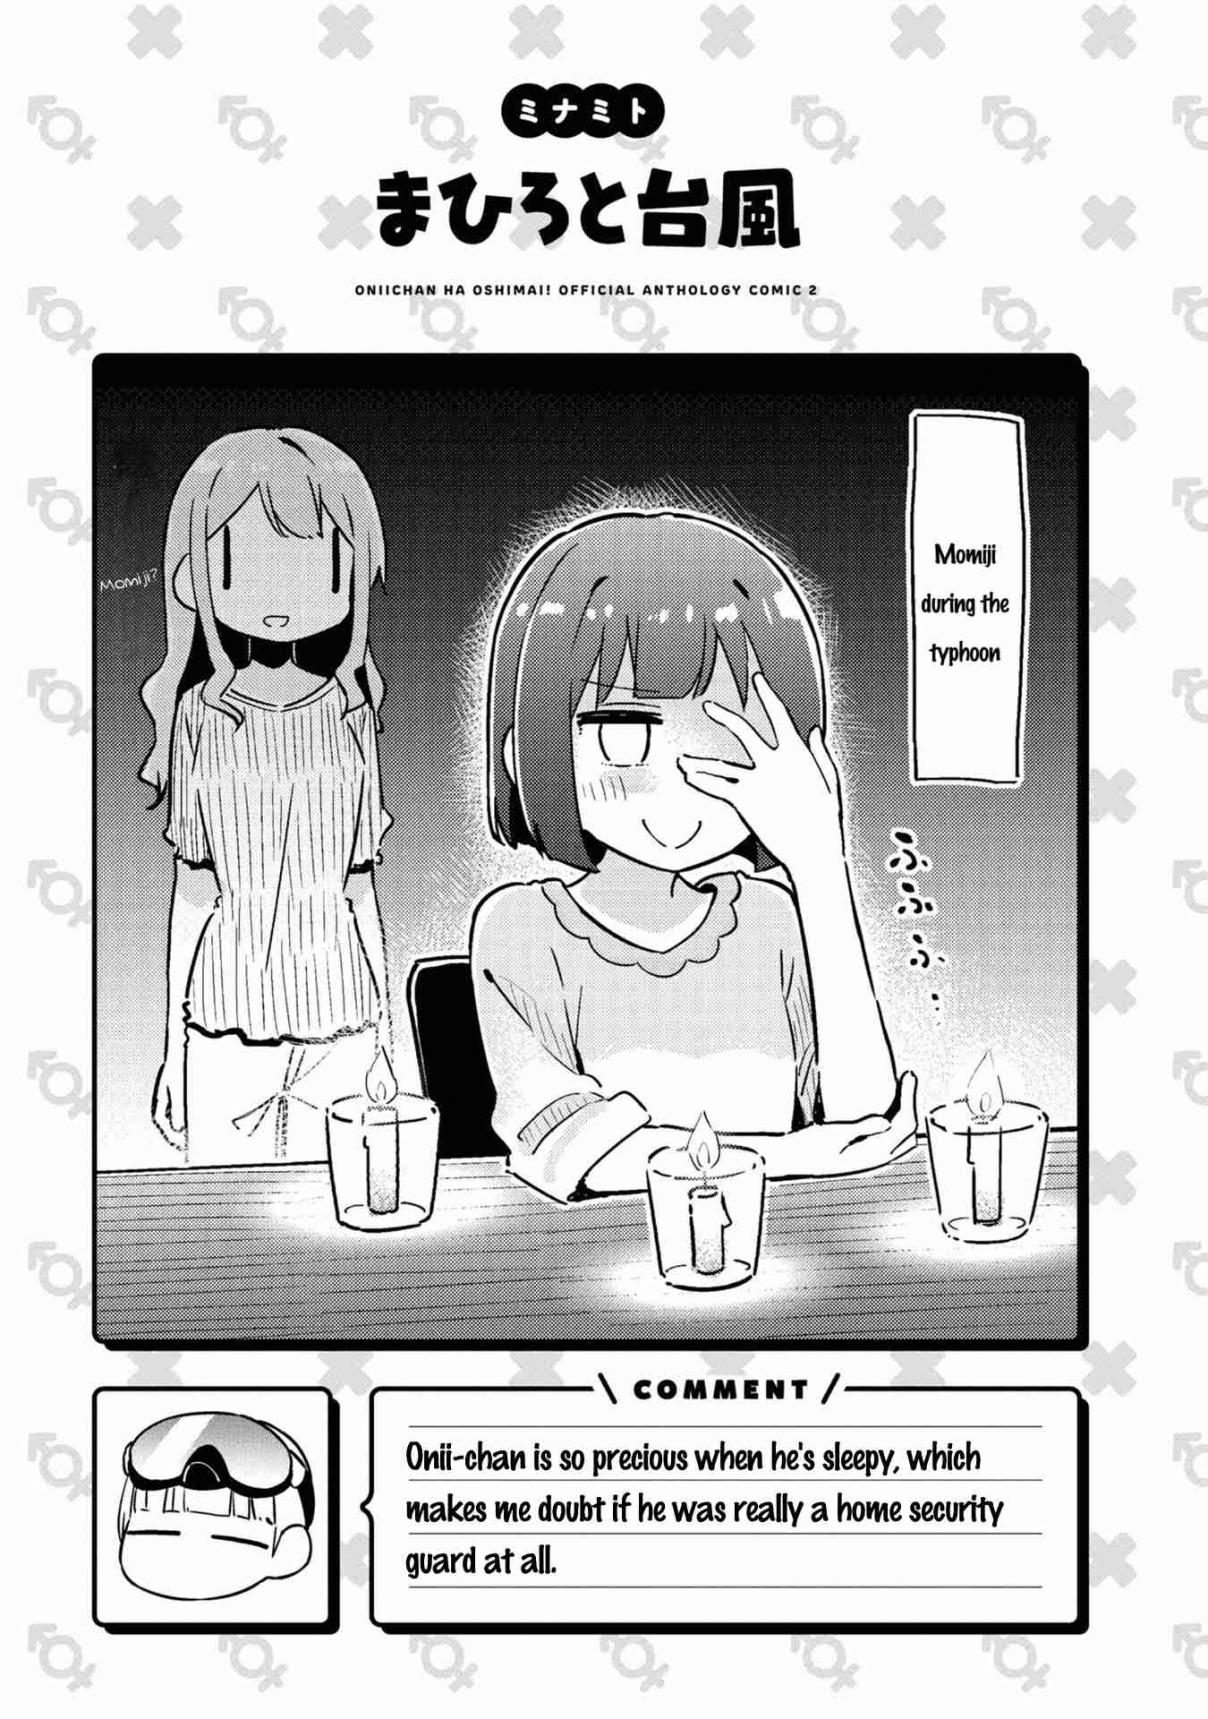 Onii-chan is Done For! Official Anthology Comic 24